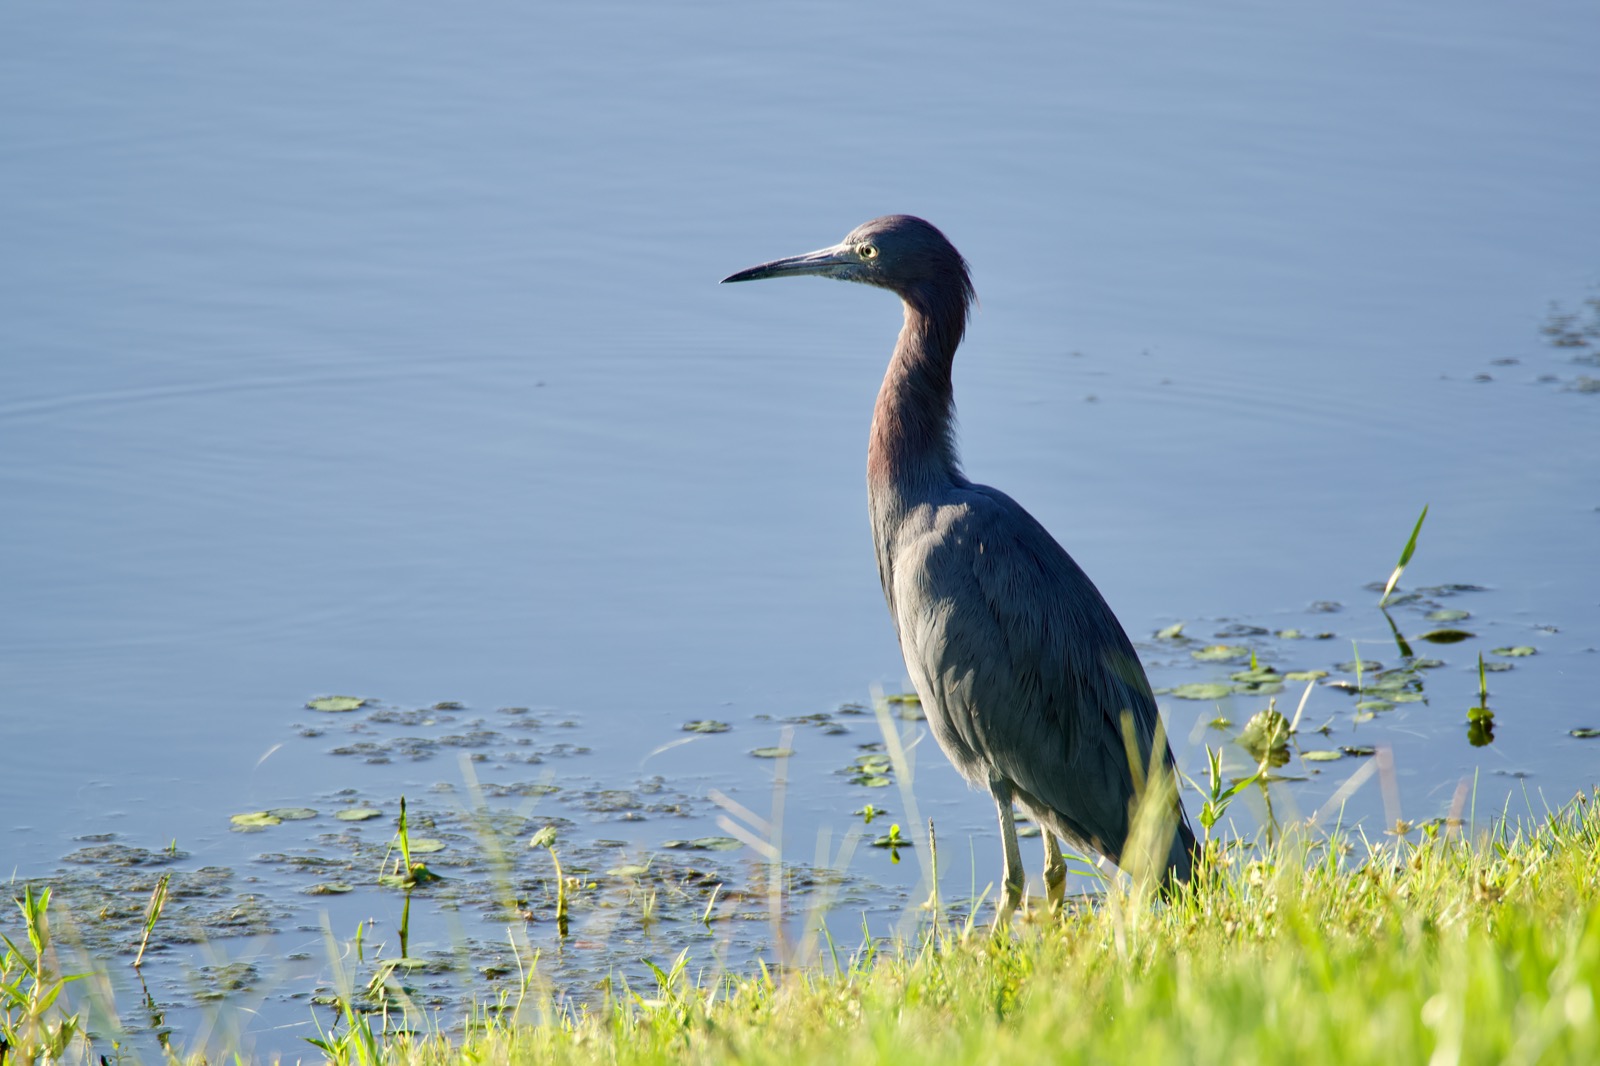 Closeup of a little blue heron standing at the edge of a pond.